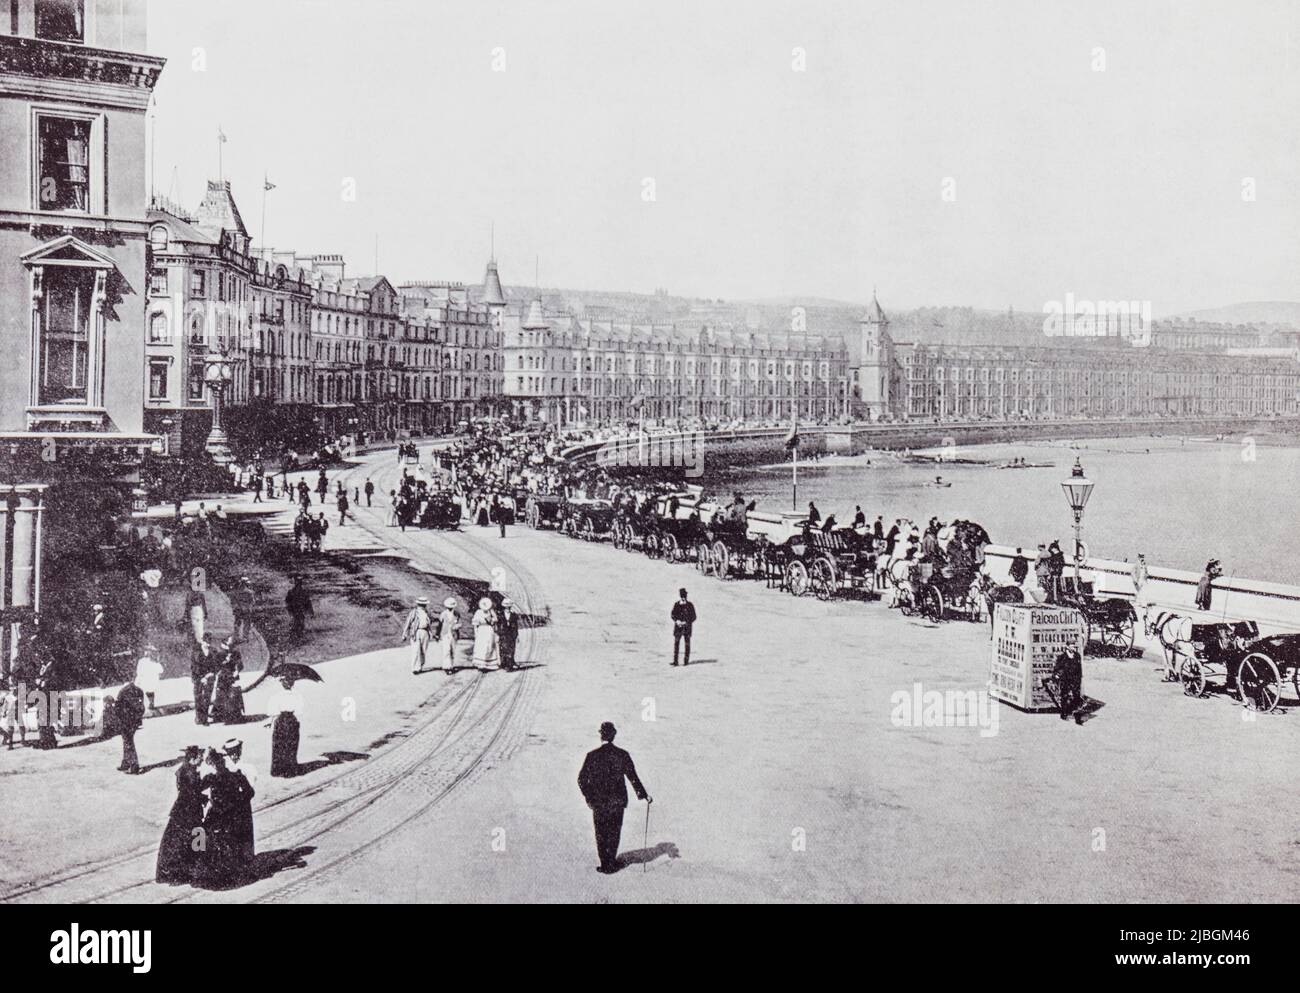 Douglas, Isle of Man. The Promenade, seen here in the 19th century.  From Around The Coast,  An Album of Pictures from Photographs of the Chief Seaside Places of Interest in Great Britain and Ireland published London, 1895, by George Newnes Limited. Stock Photo